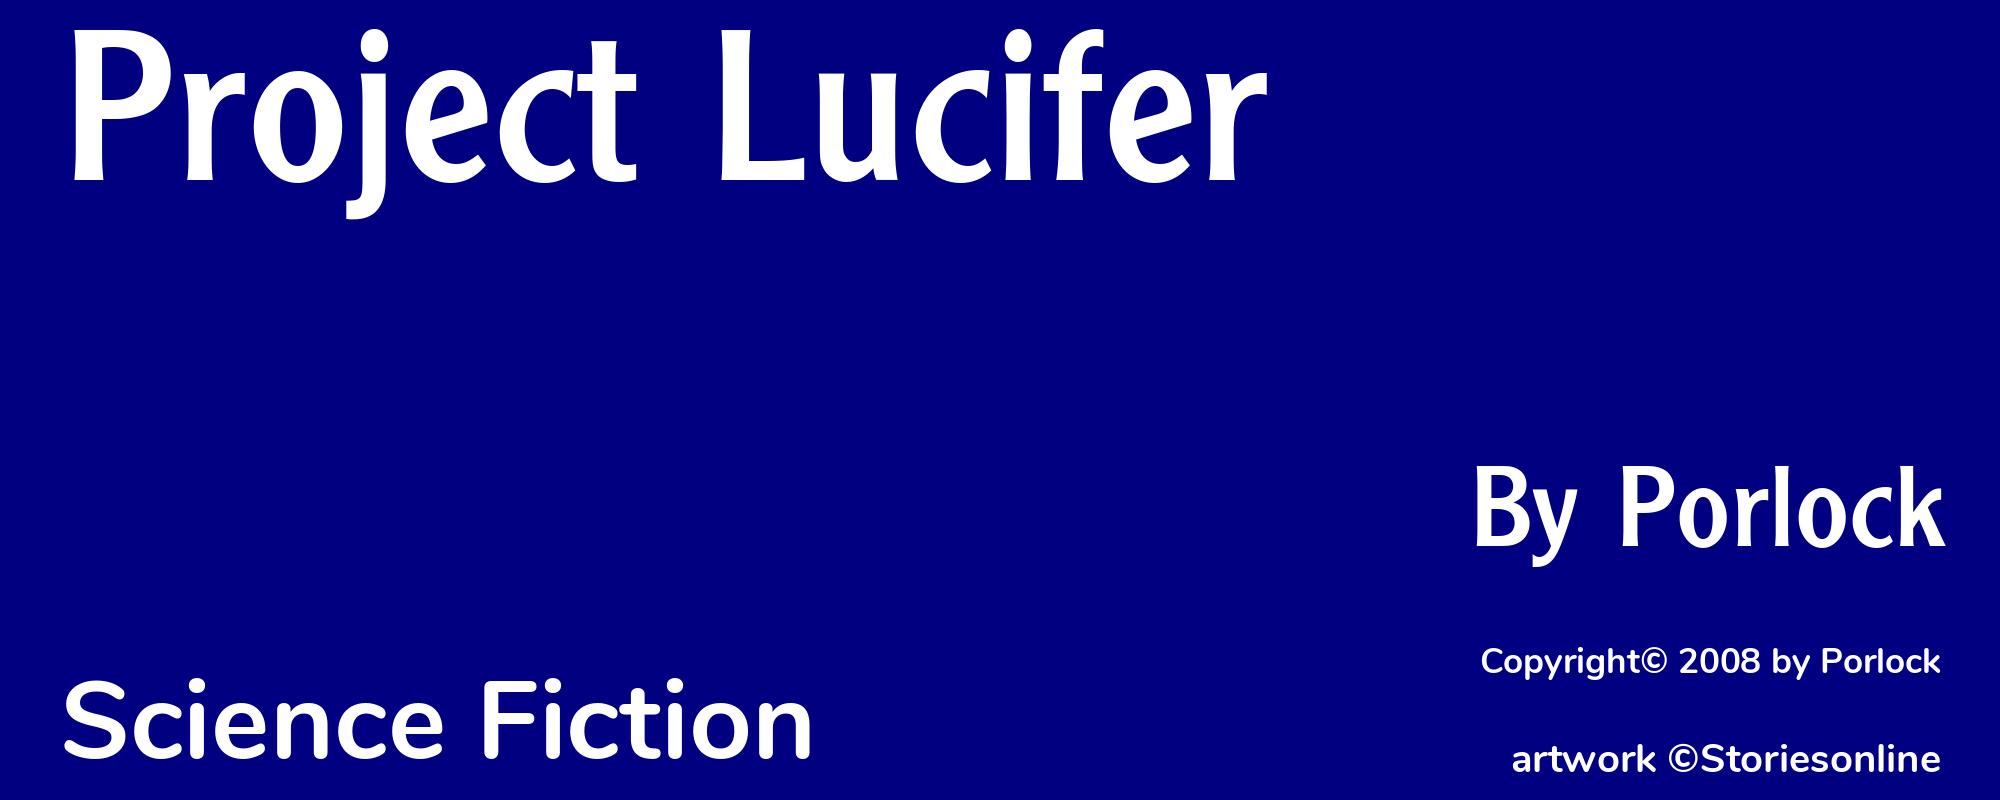 Project Lucifer - Cover